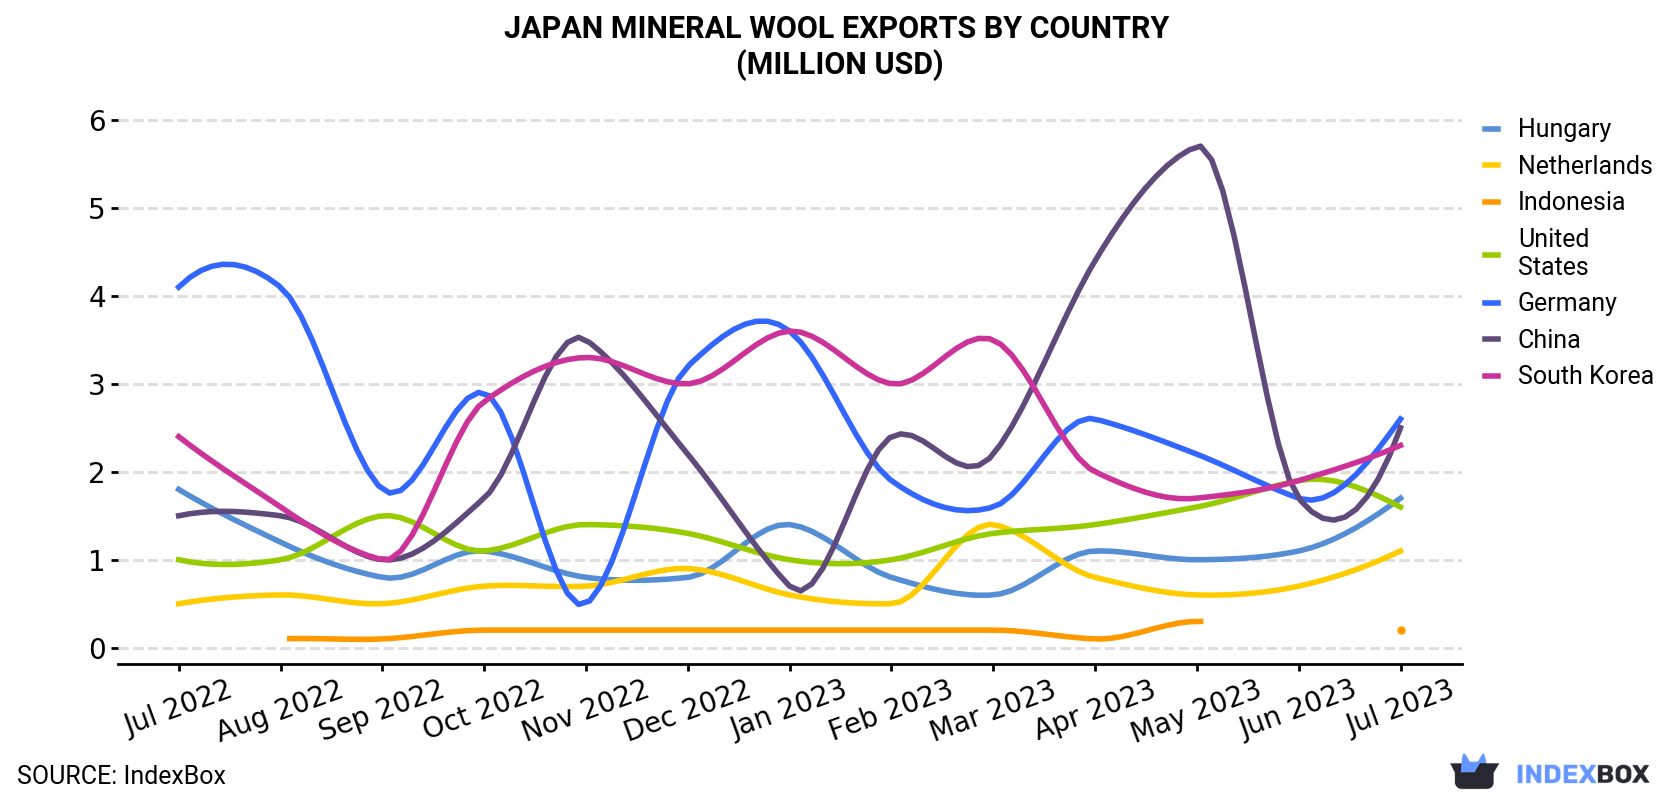 Japan Mineral Wool Exports By Country (Million USD)